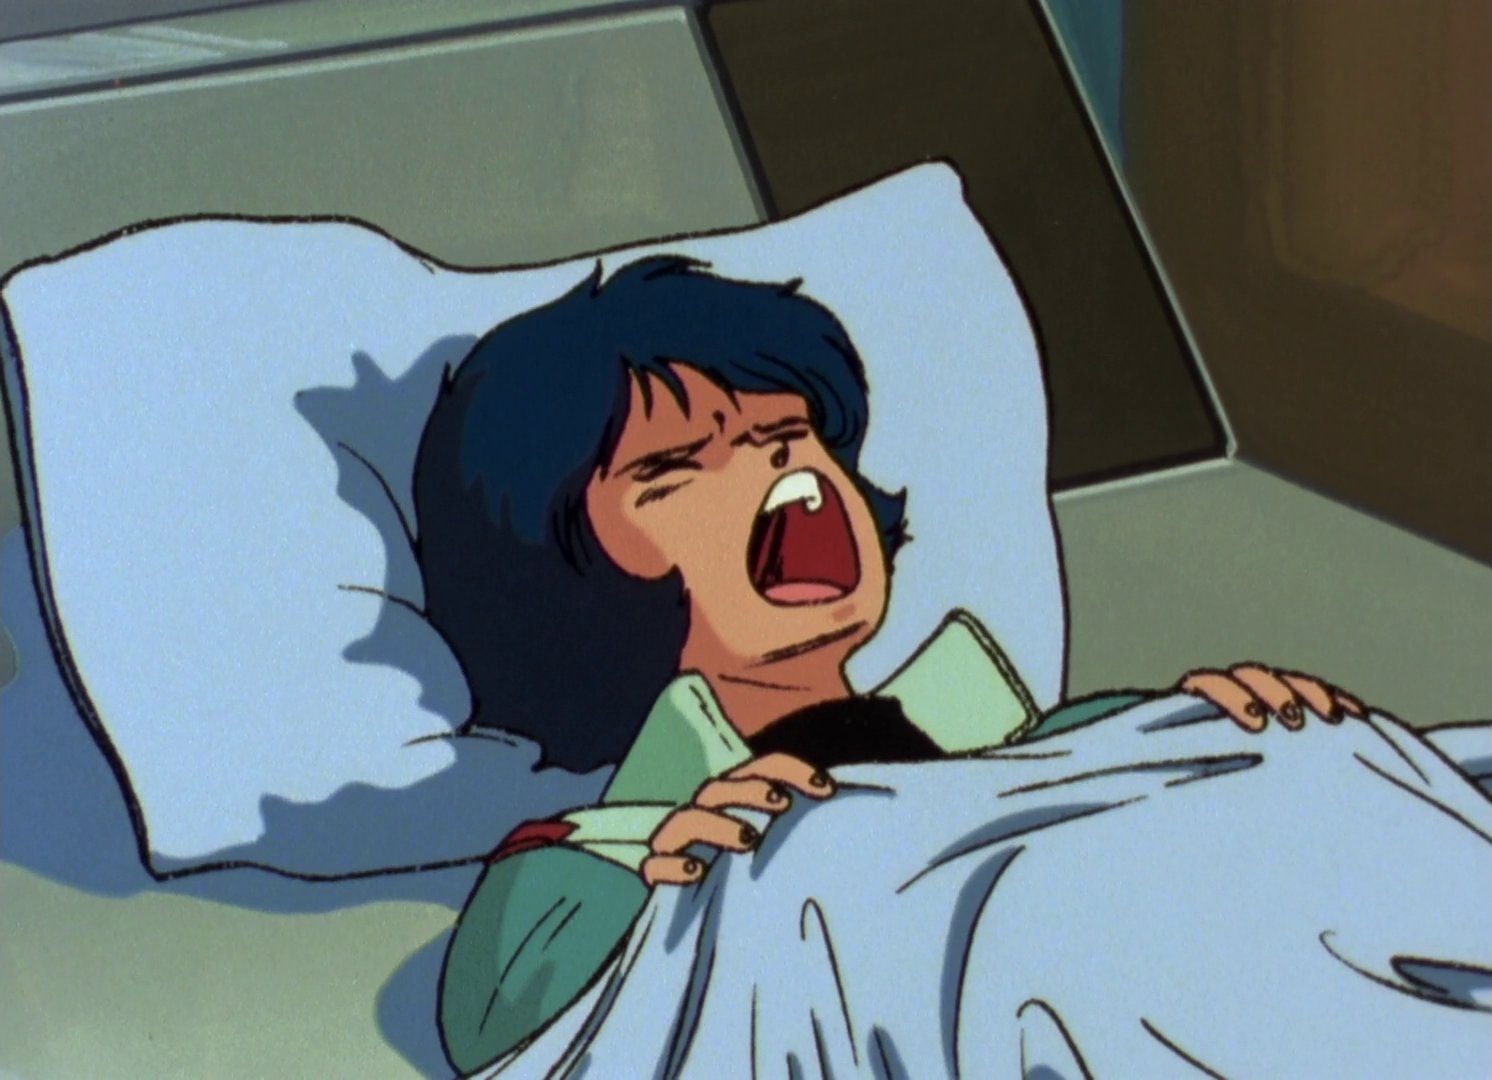 Kamille in bed in his uniform.